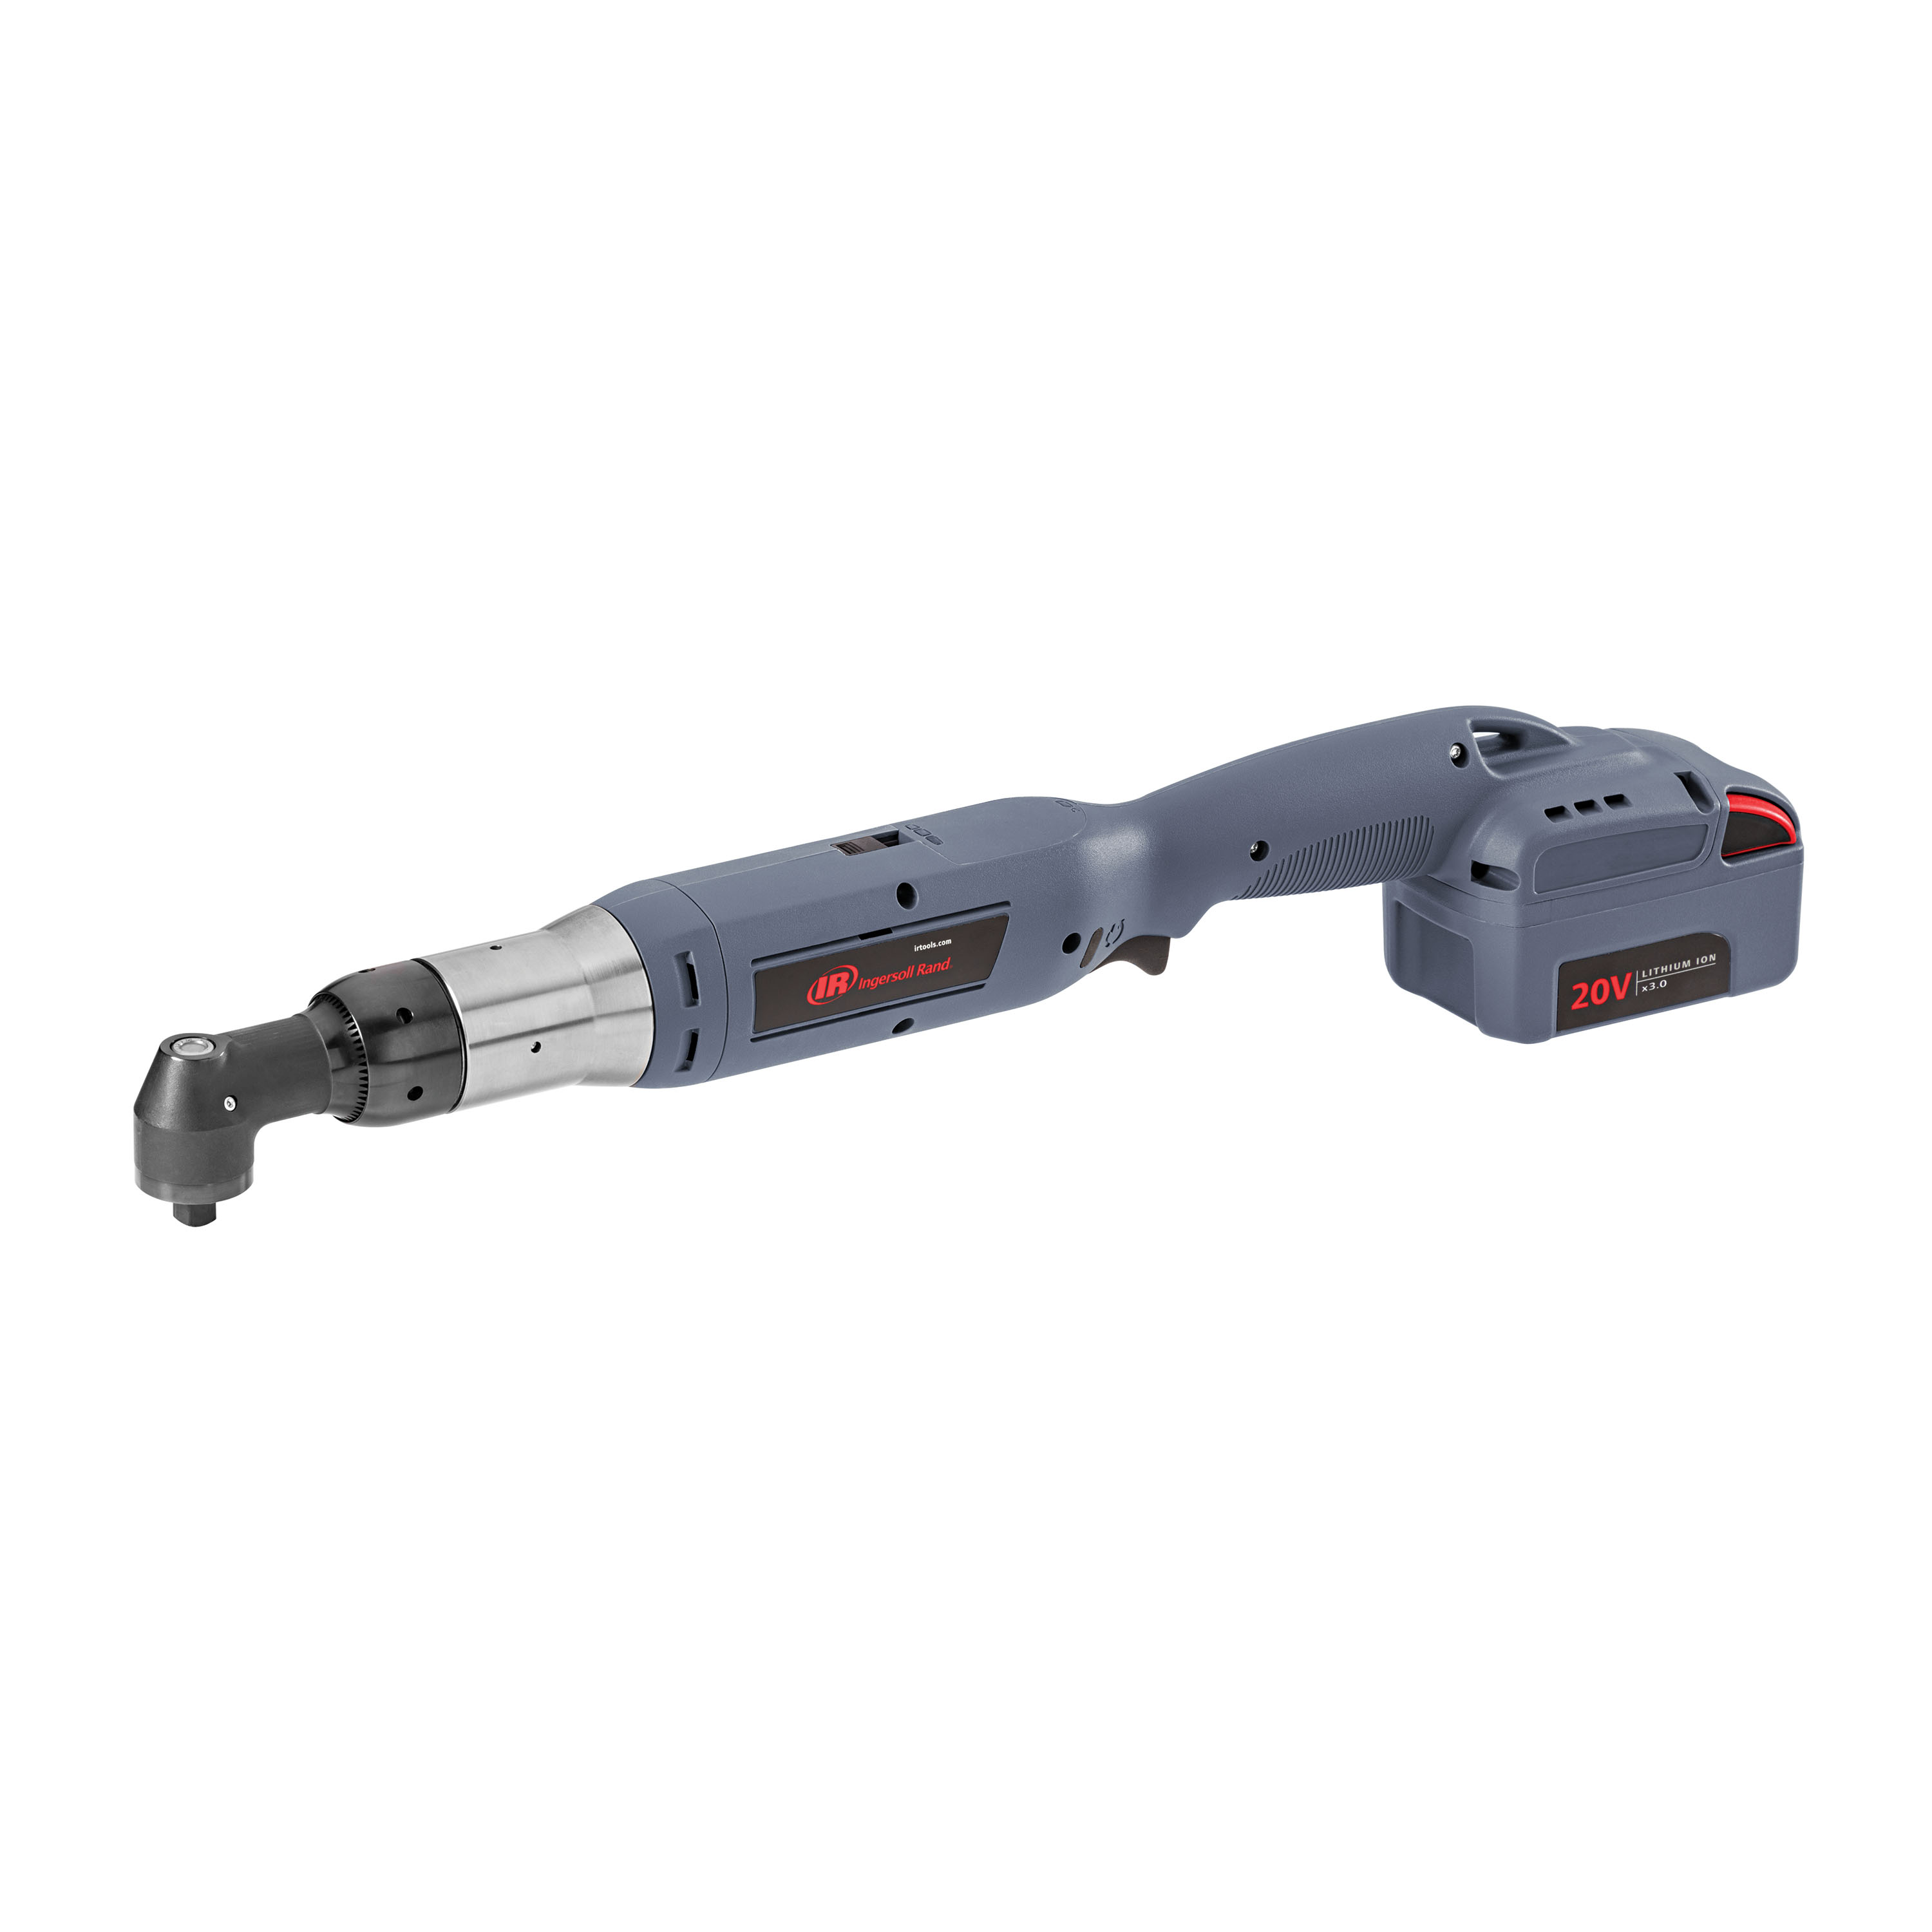 QXFN Cordless Angle Wrench